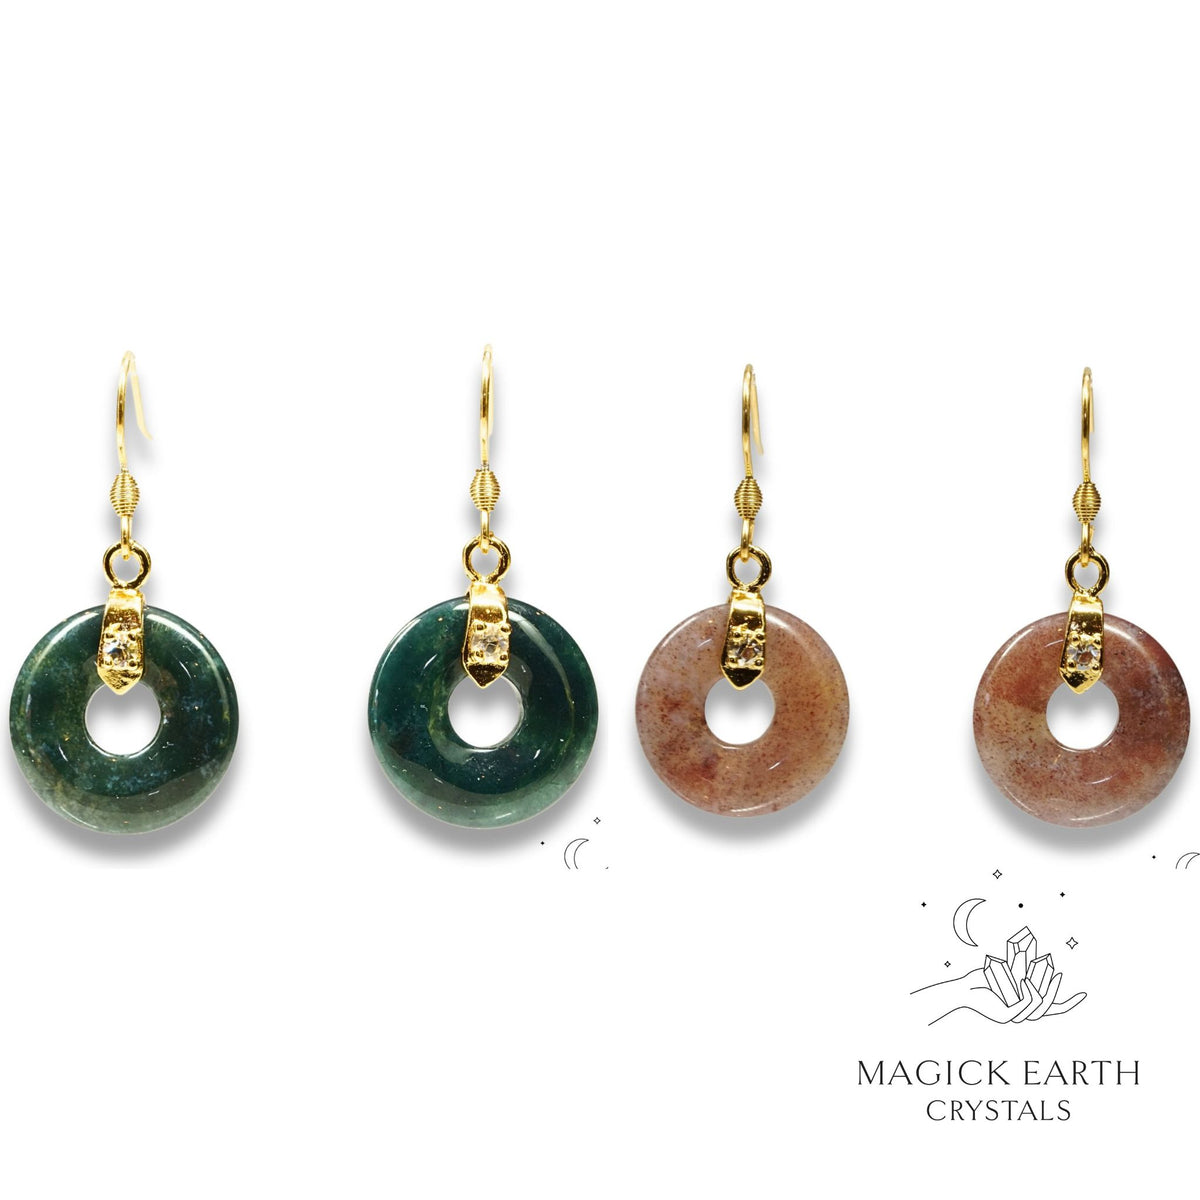 Moss / Indian Agate Crystal Gemstone Donut Pi Earrings in Gold or Platinum Finish